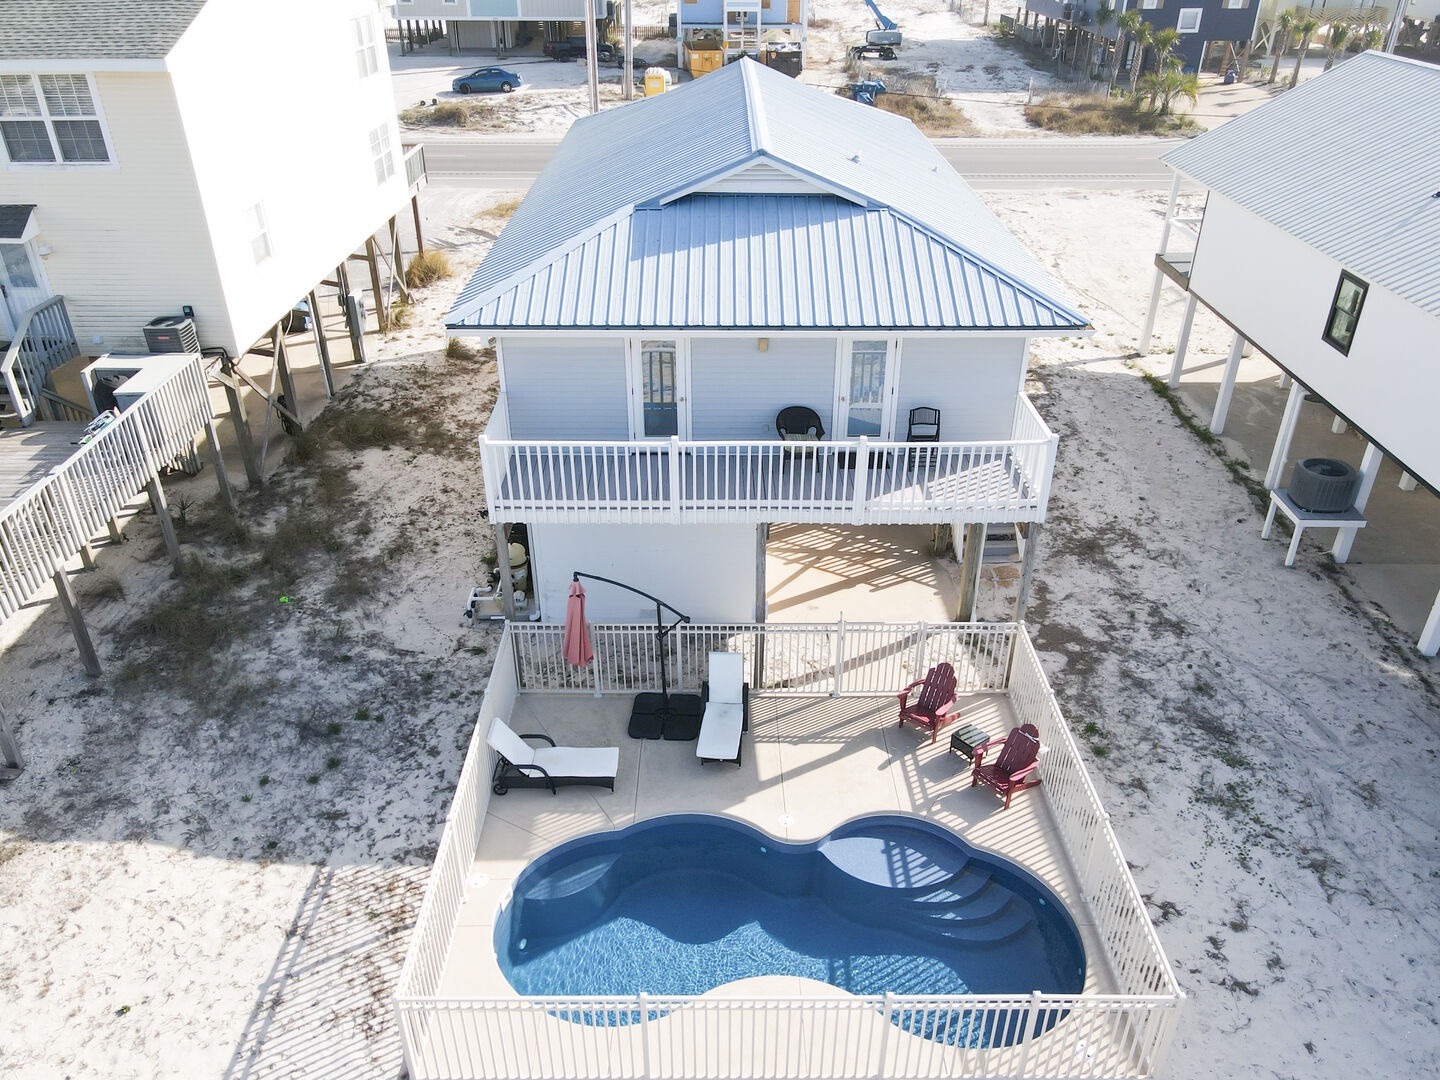 Welcome to 50 Shades of Blue, where you can enjoy paradise in the front and the back yards!